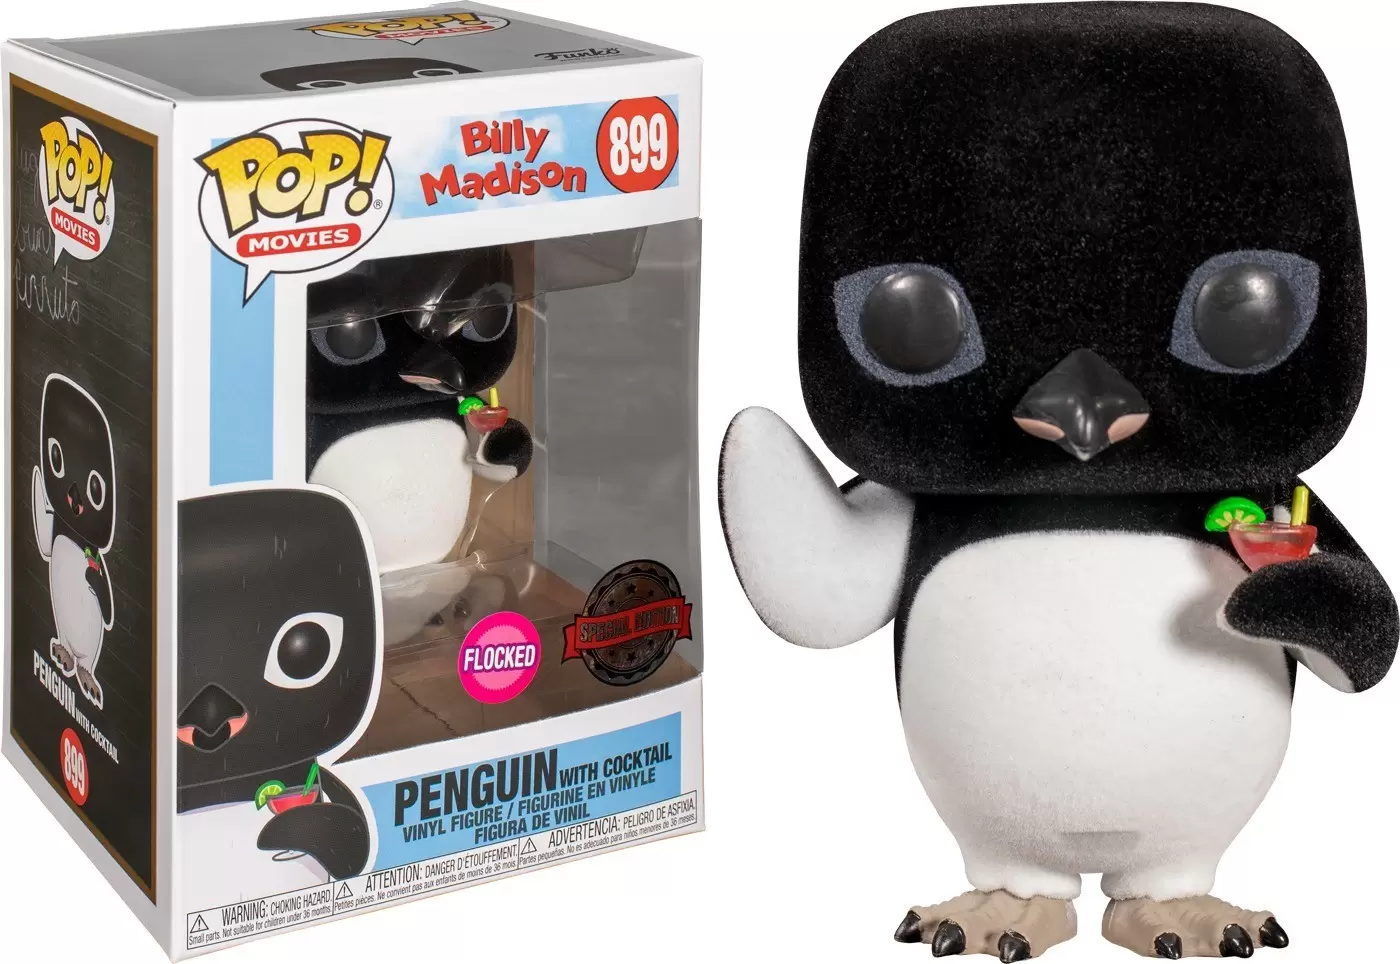 POP! Movies - Billy Madison - Penguin with a cocktail Flocked